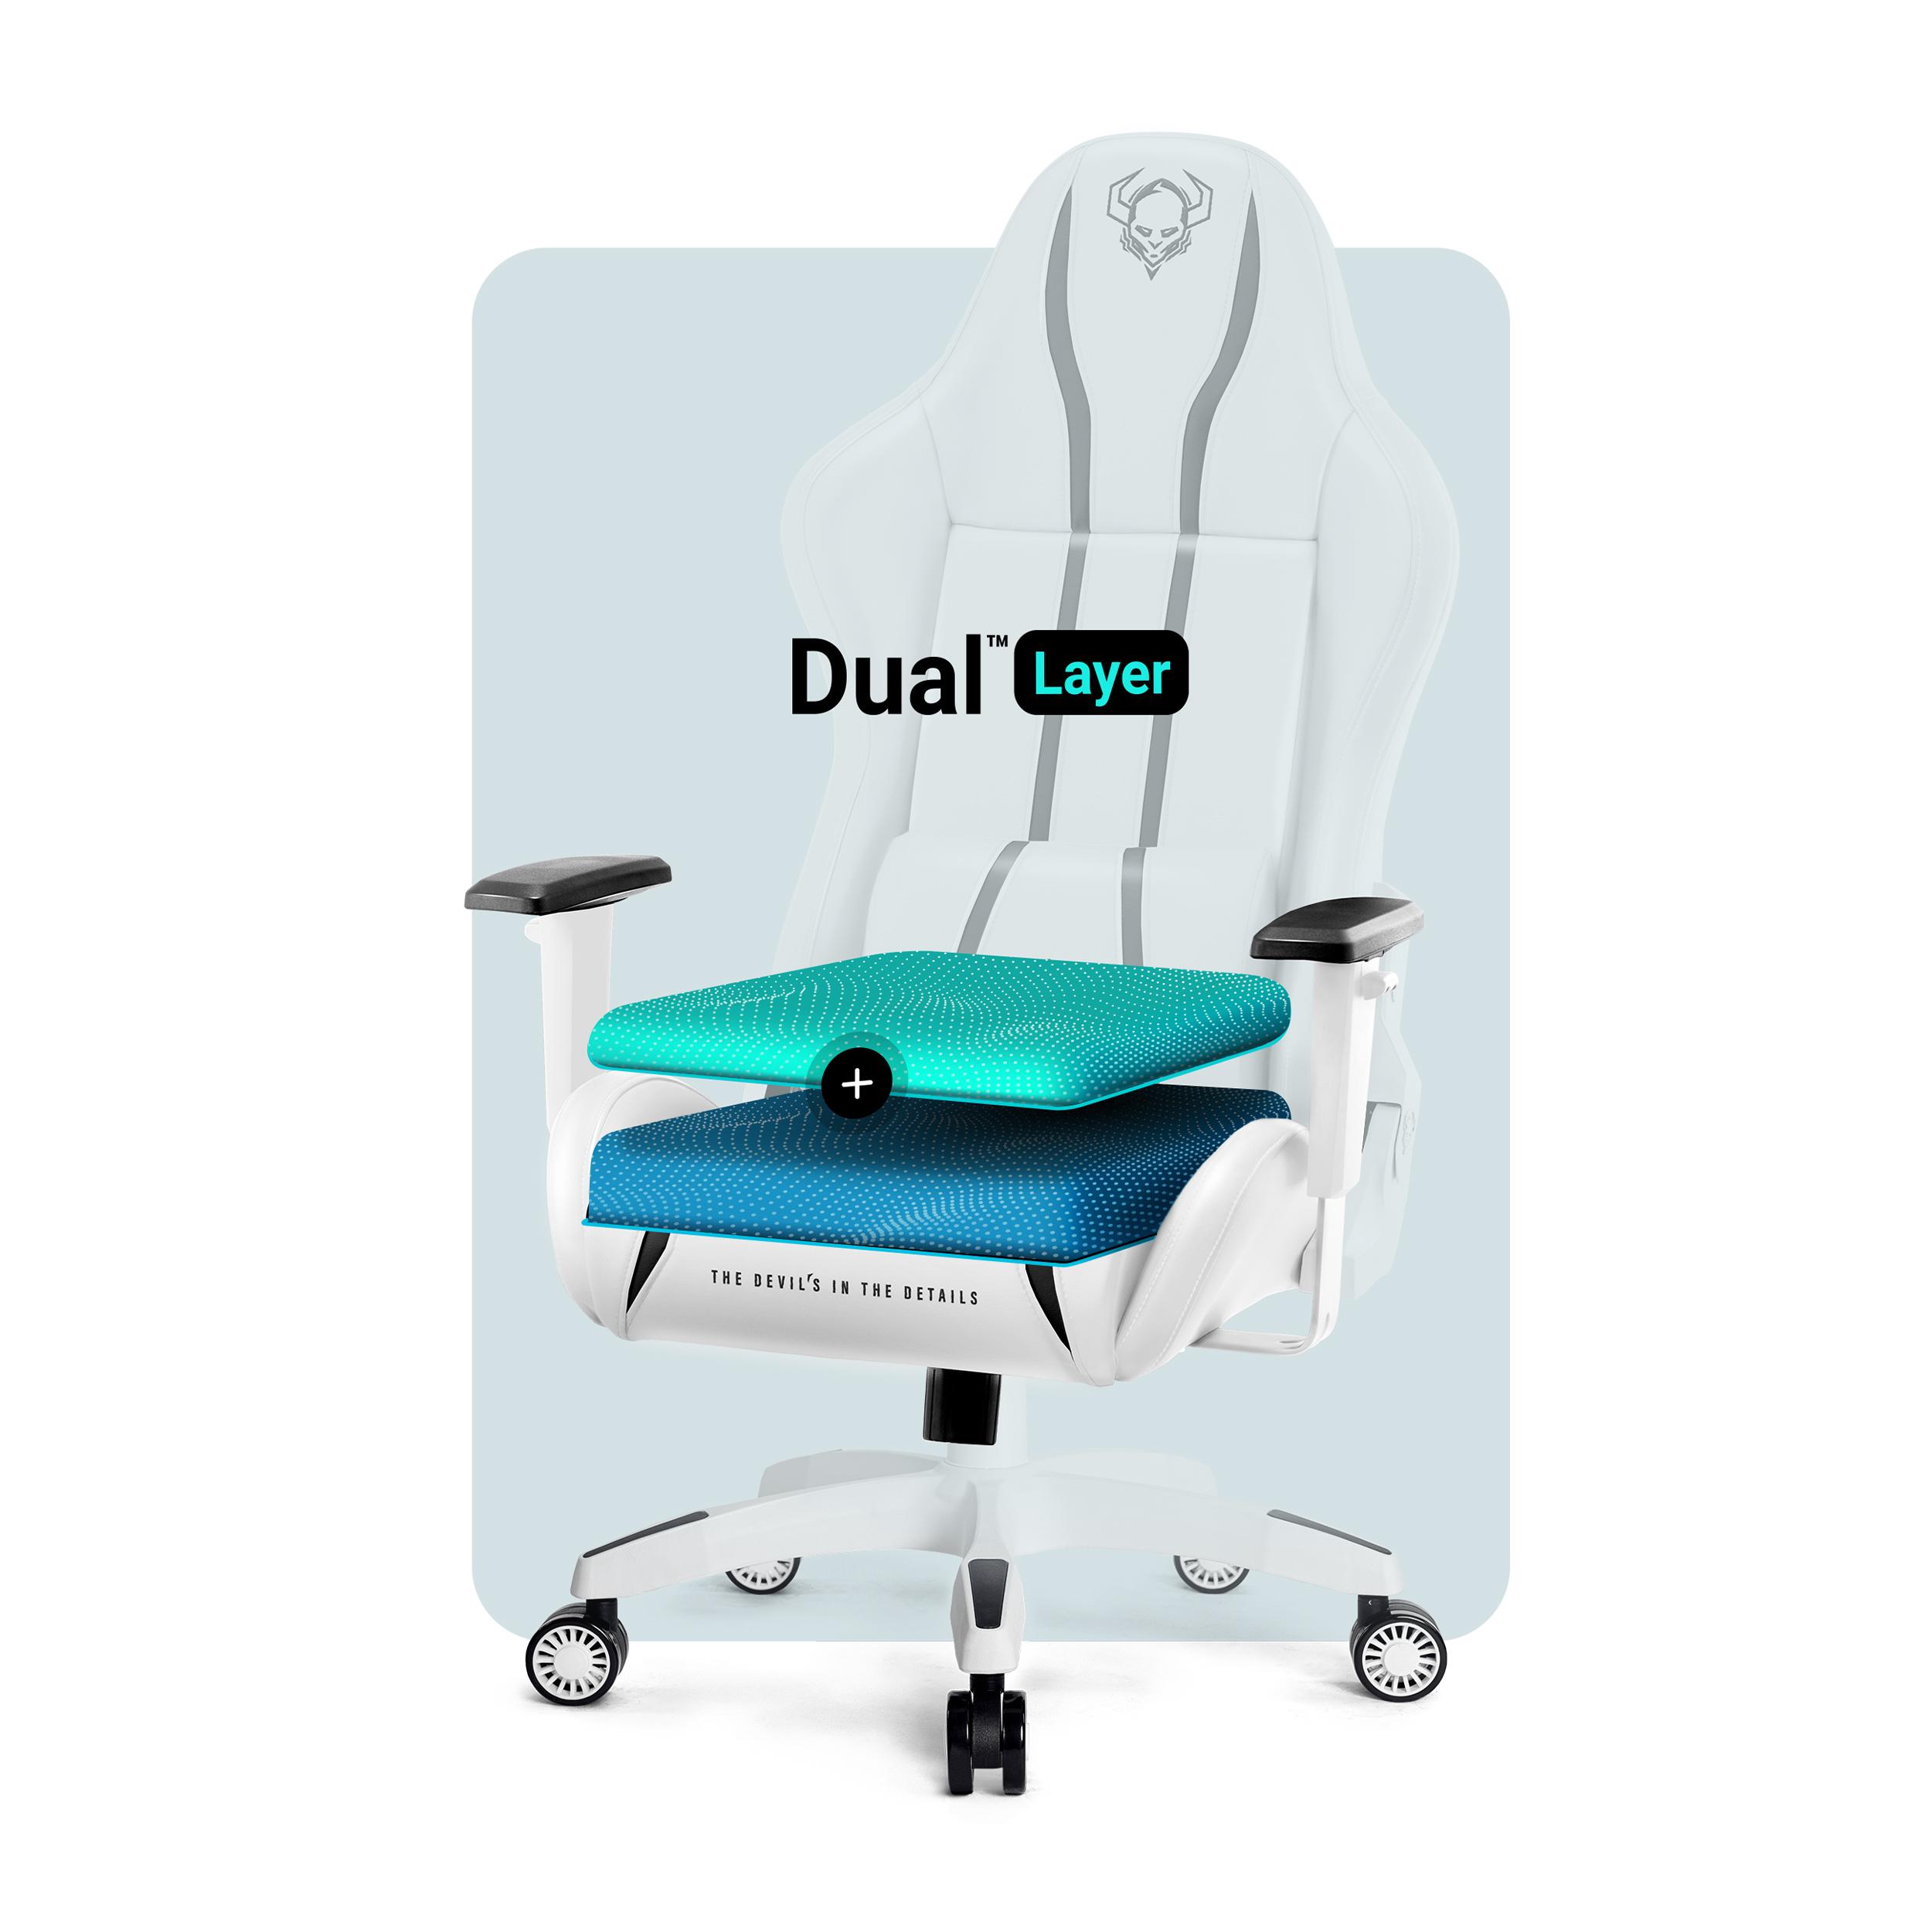 Gaming X-ONE STUHL DIABLO CHAIRS 2.0 white GAMING NORMAL Chair,